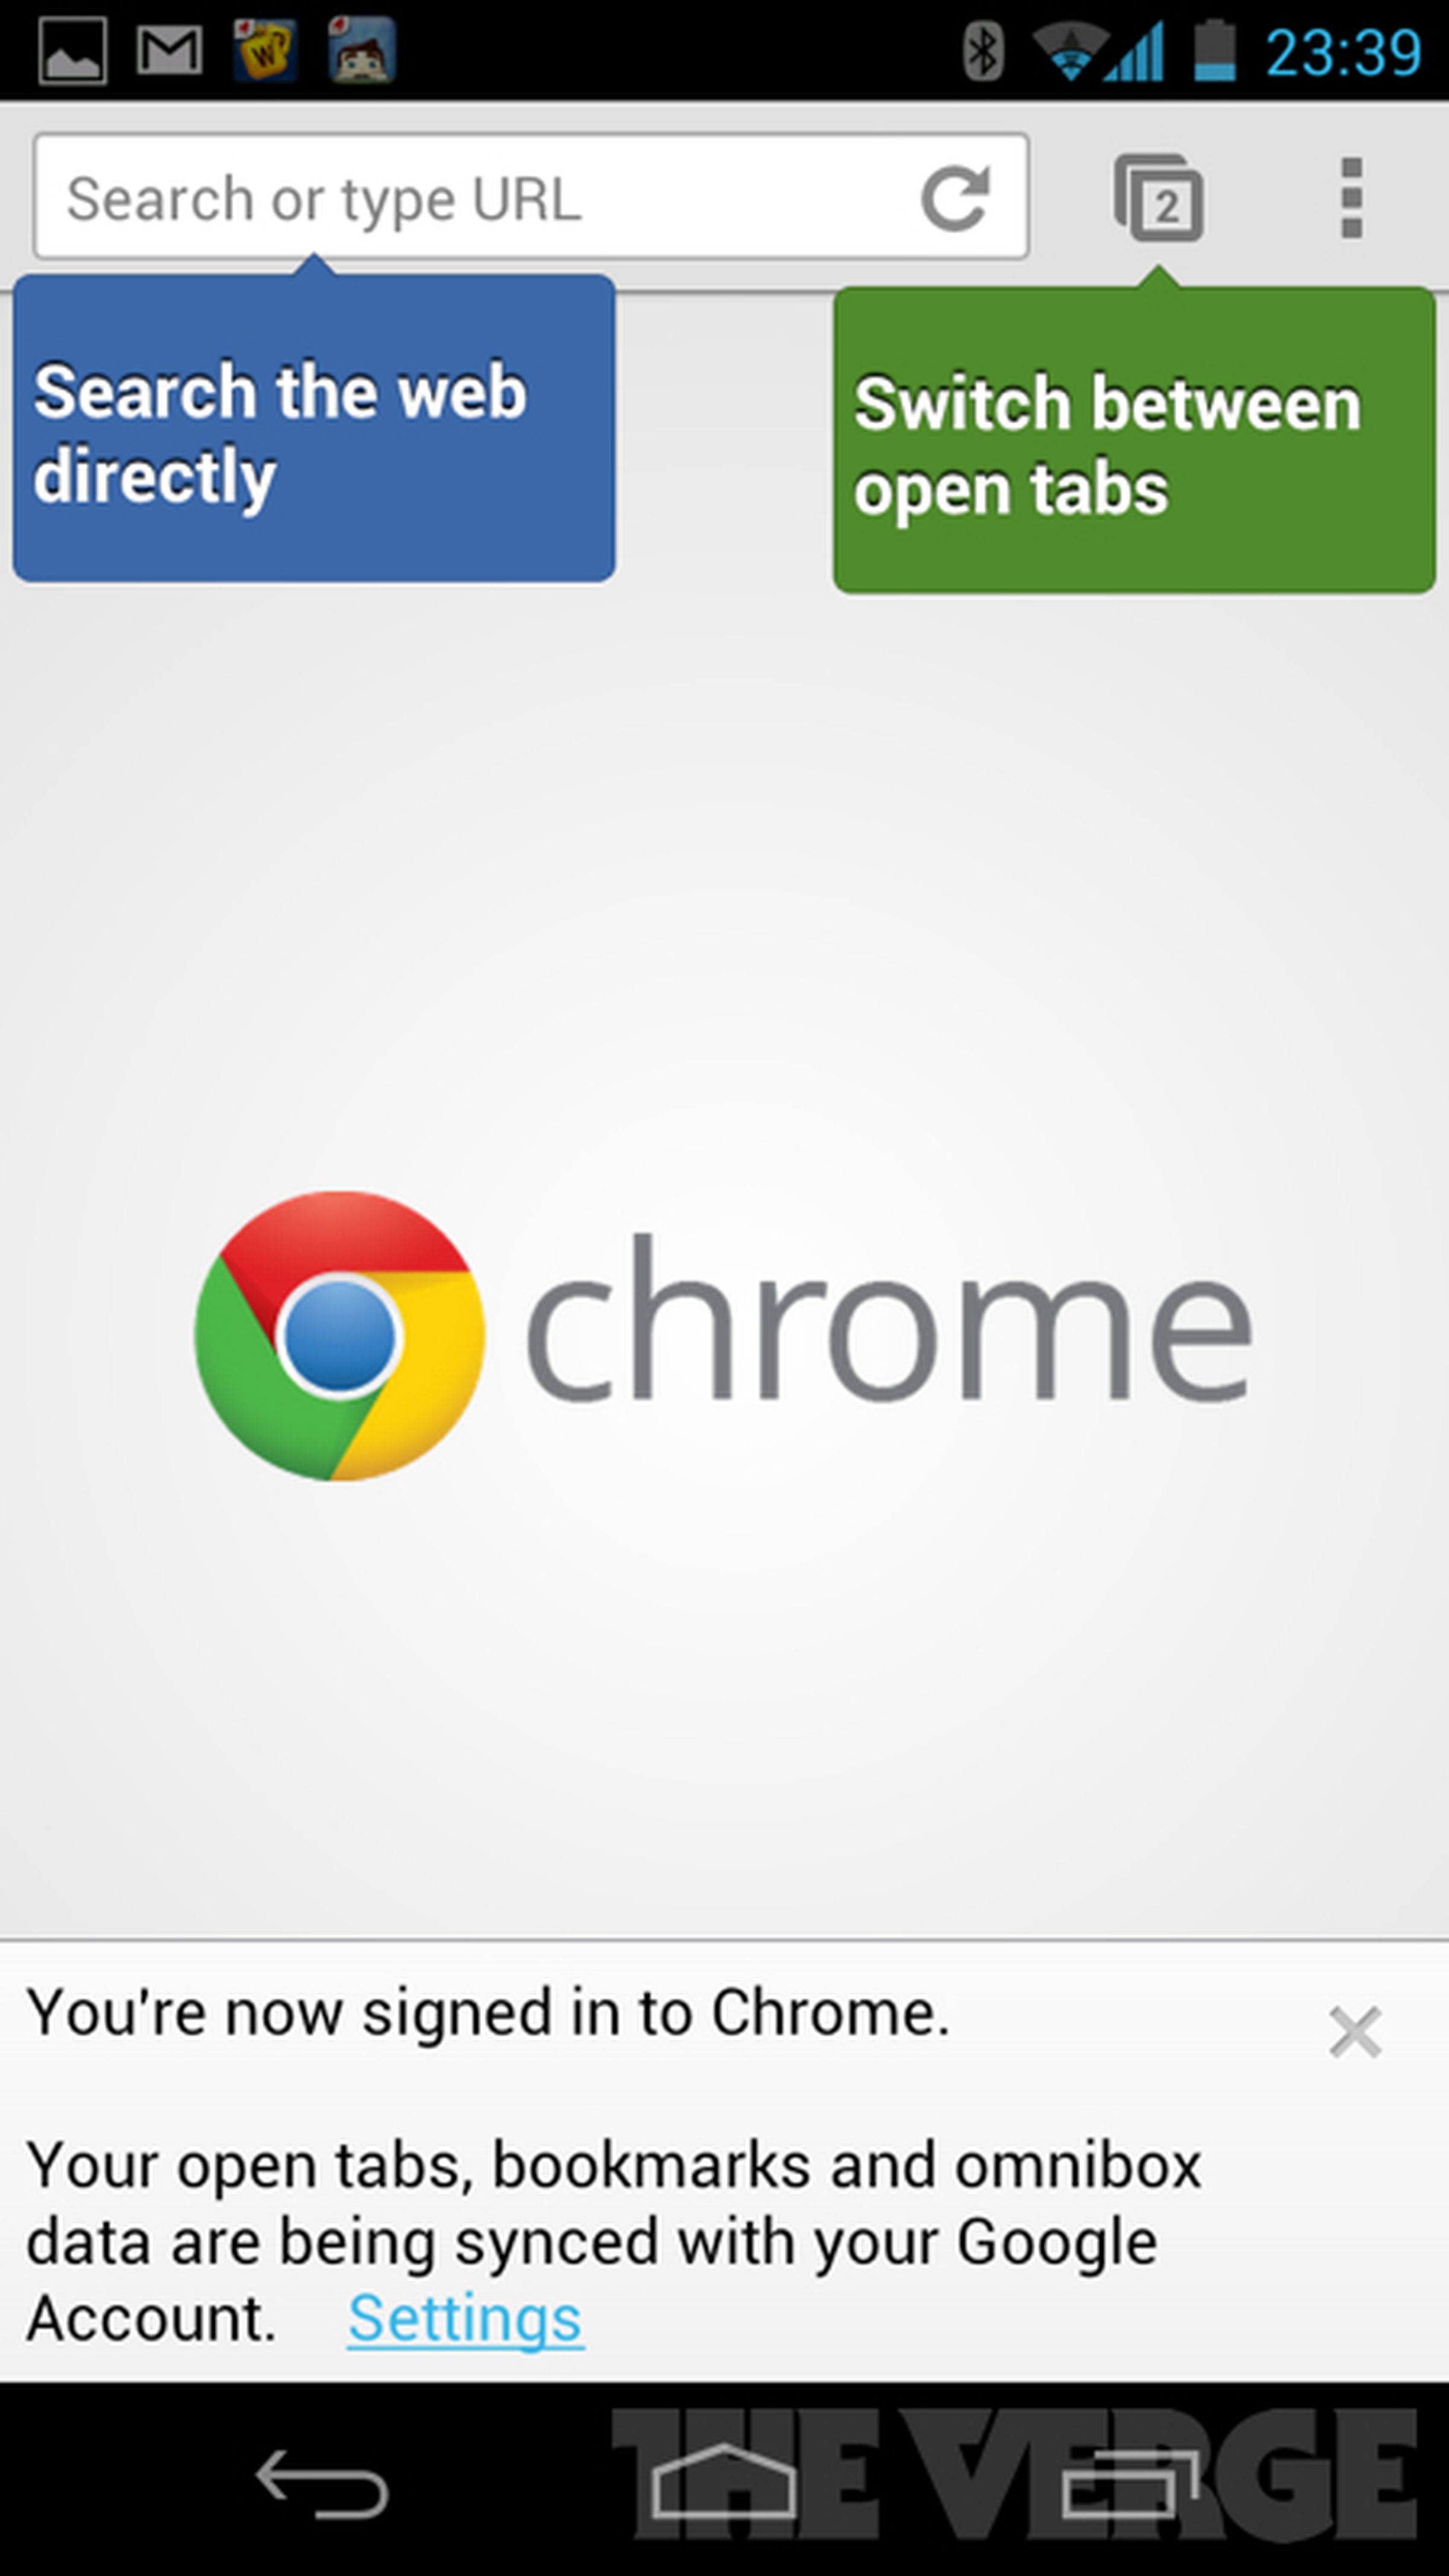 Chrome for Android Beta